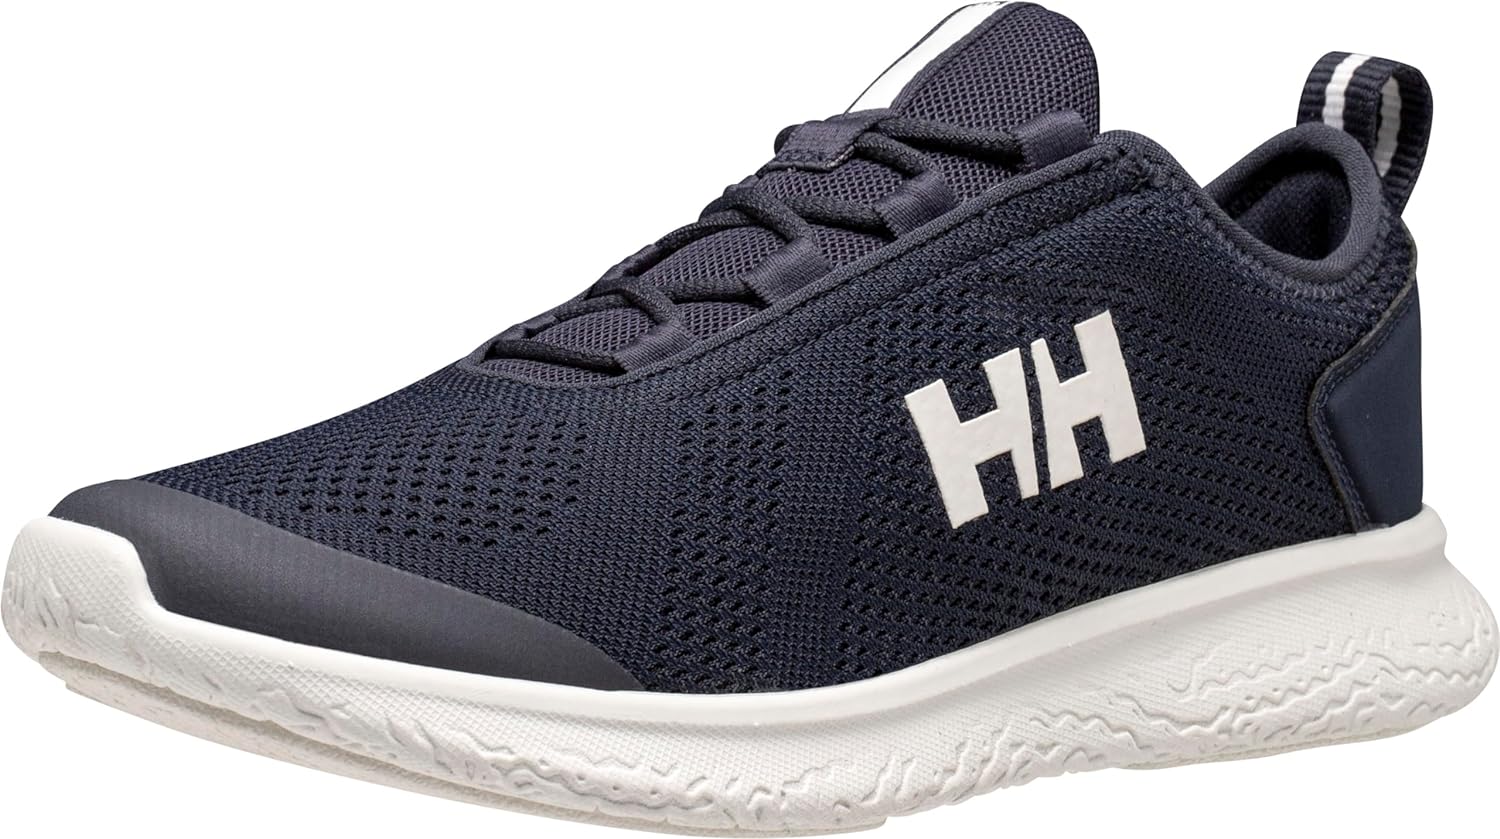 Read more about the article Helly Hansen Womens Supalight Medley Shoes Review